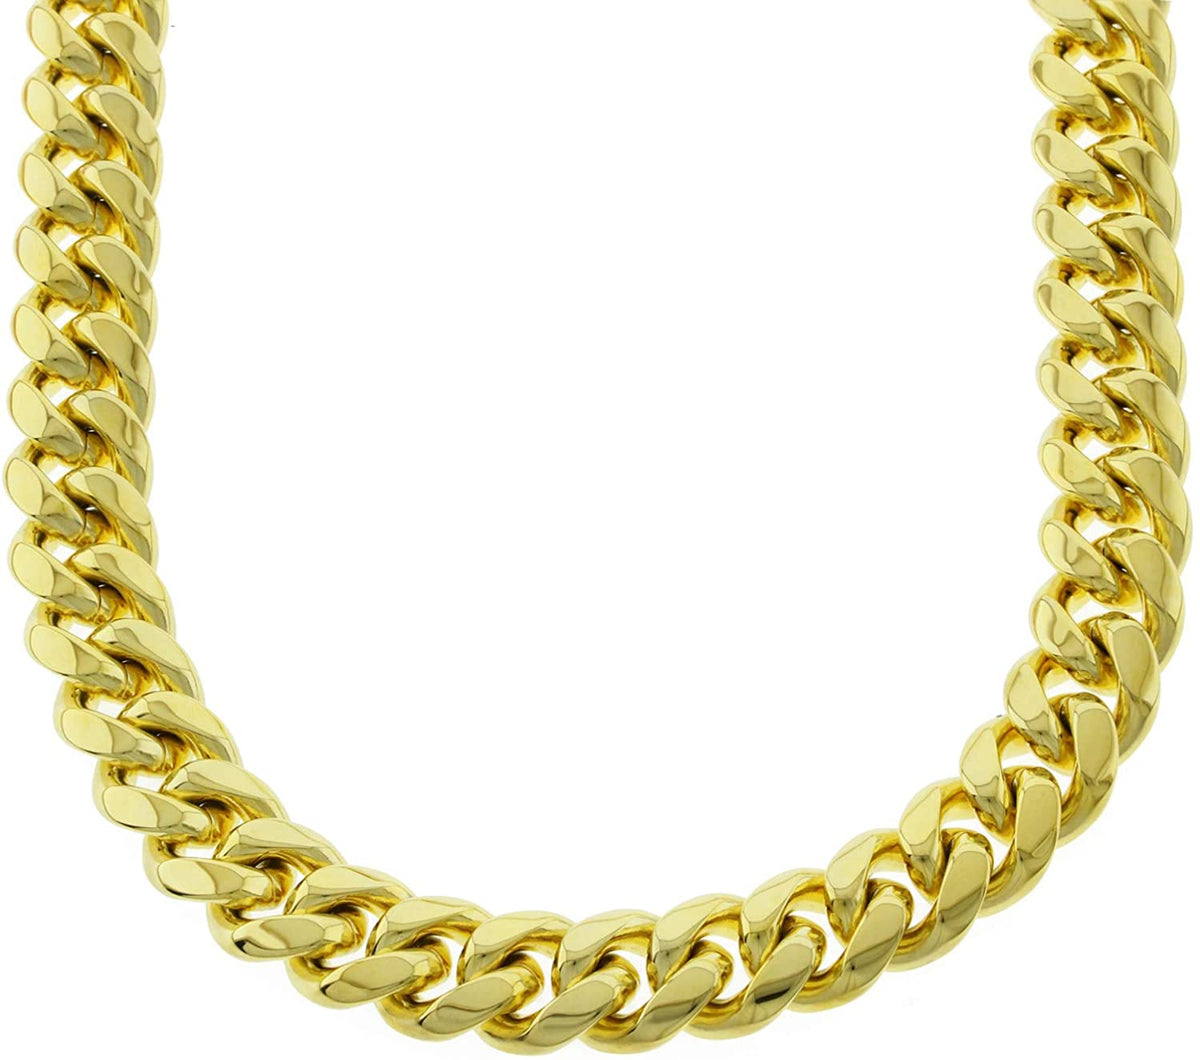 Men's Miami Cuban Link Chain HEAVY 12mm 24" L 18k Gold Filled Stainless Steel 